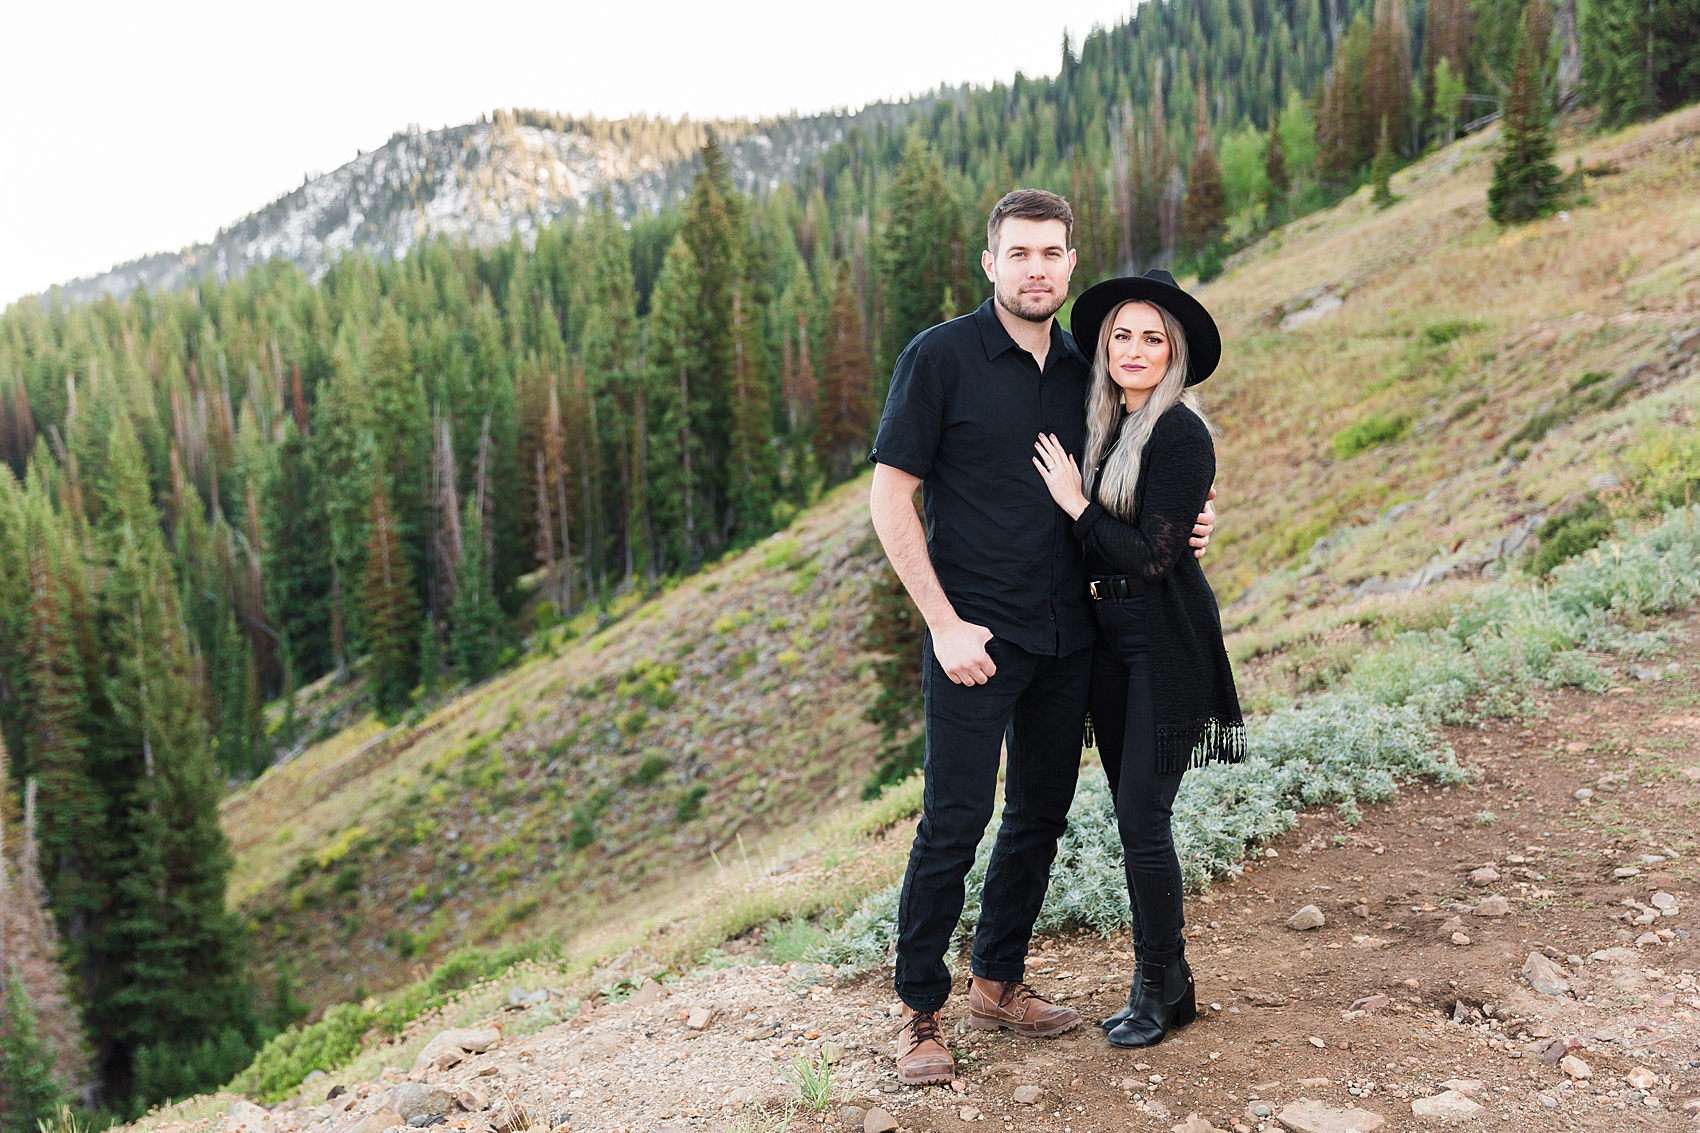 Leah Hope Photography | Salt Lake City Utah | Canyon Greenery Mountains | Family Pictures | What to Wear | Family Poses | Children